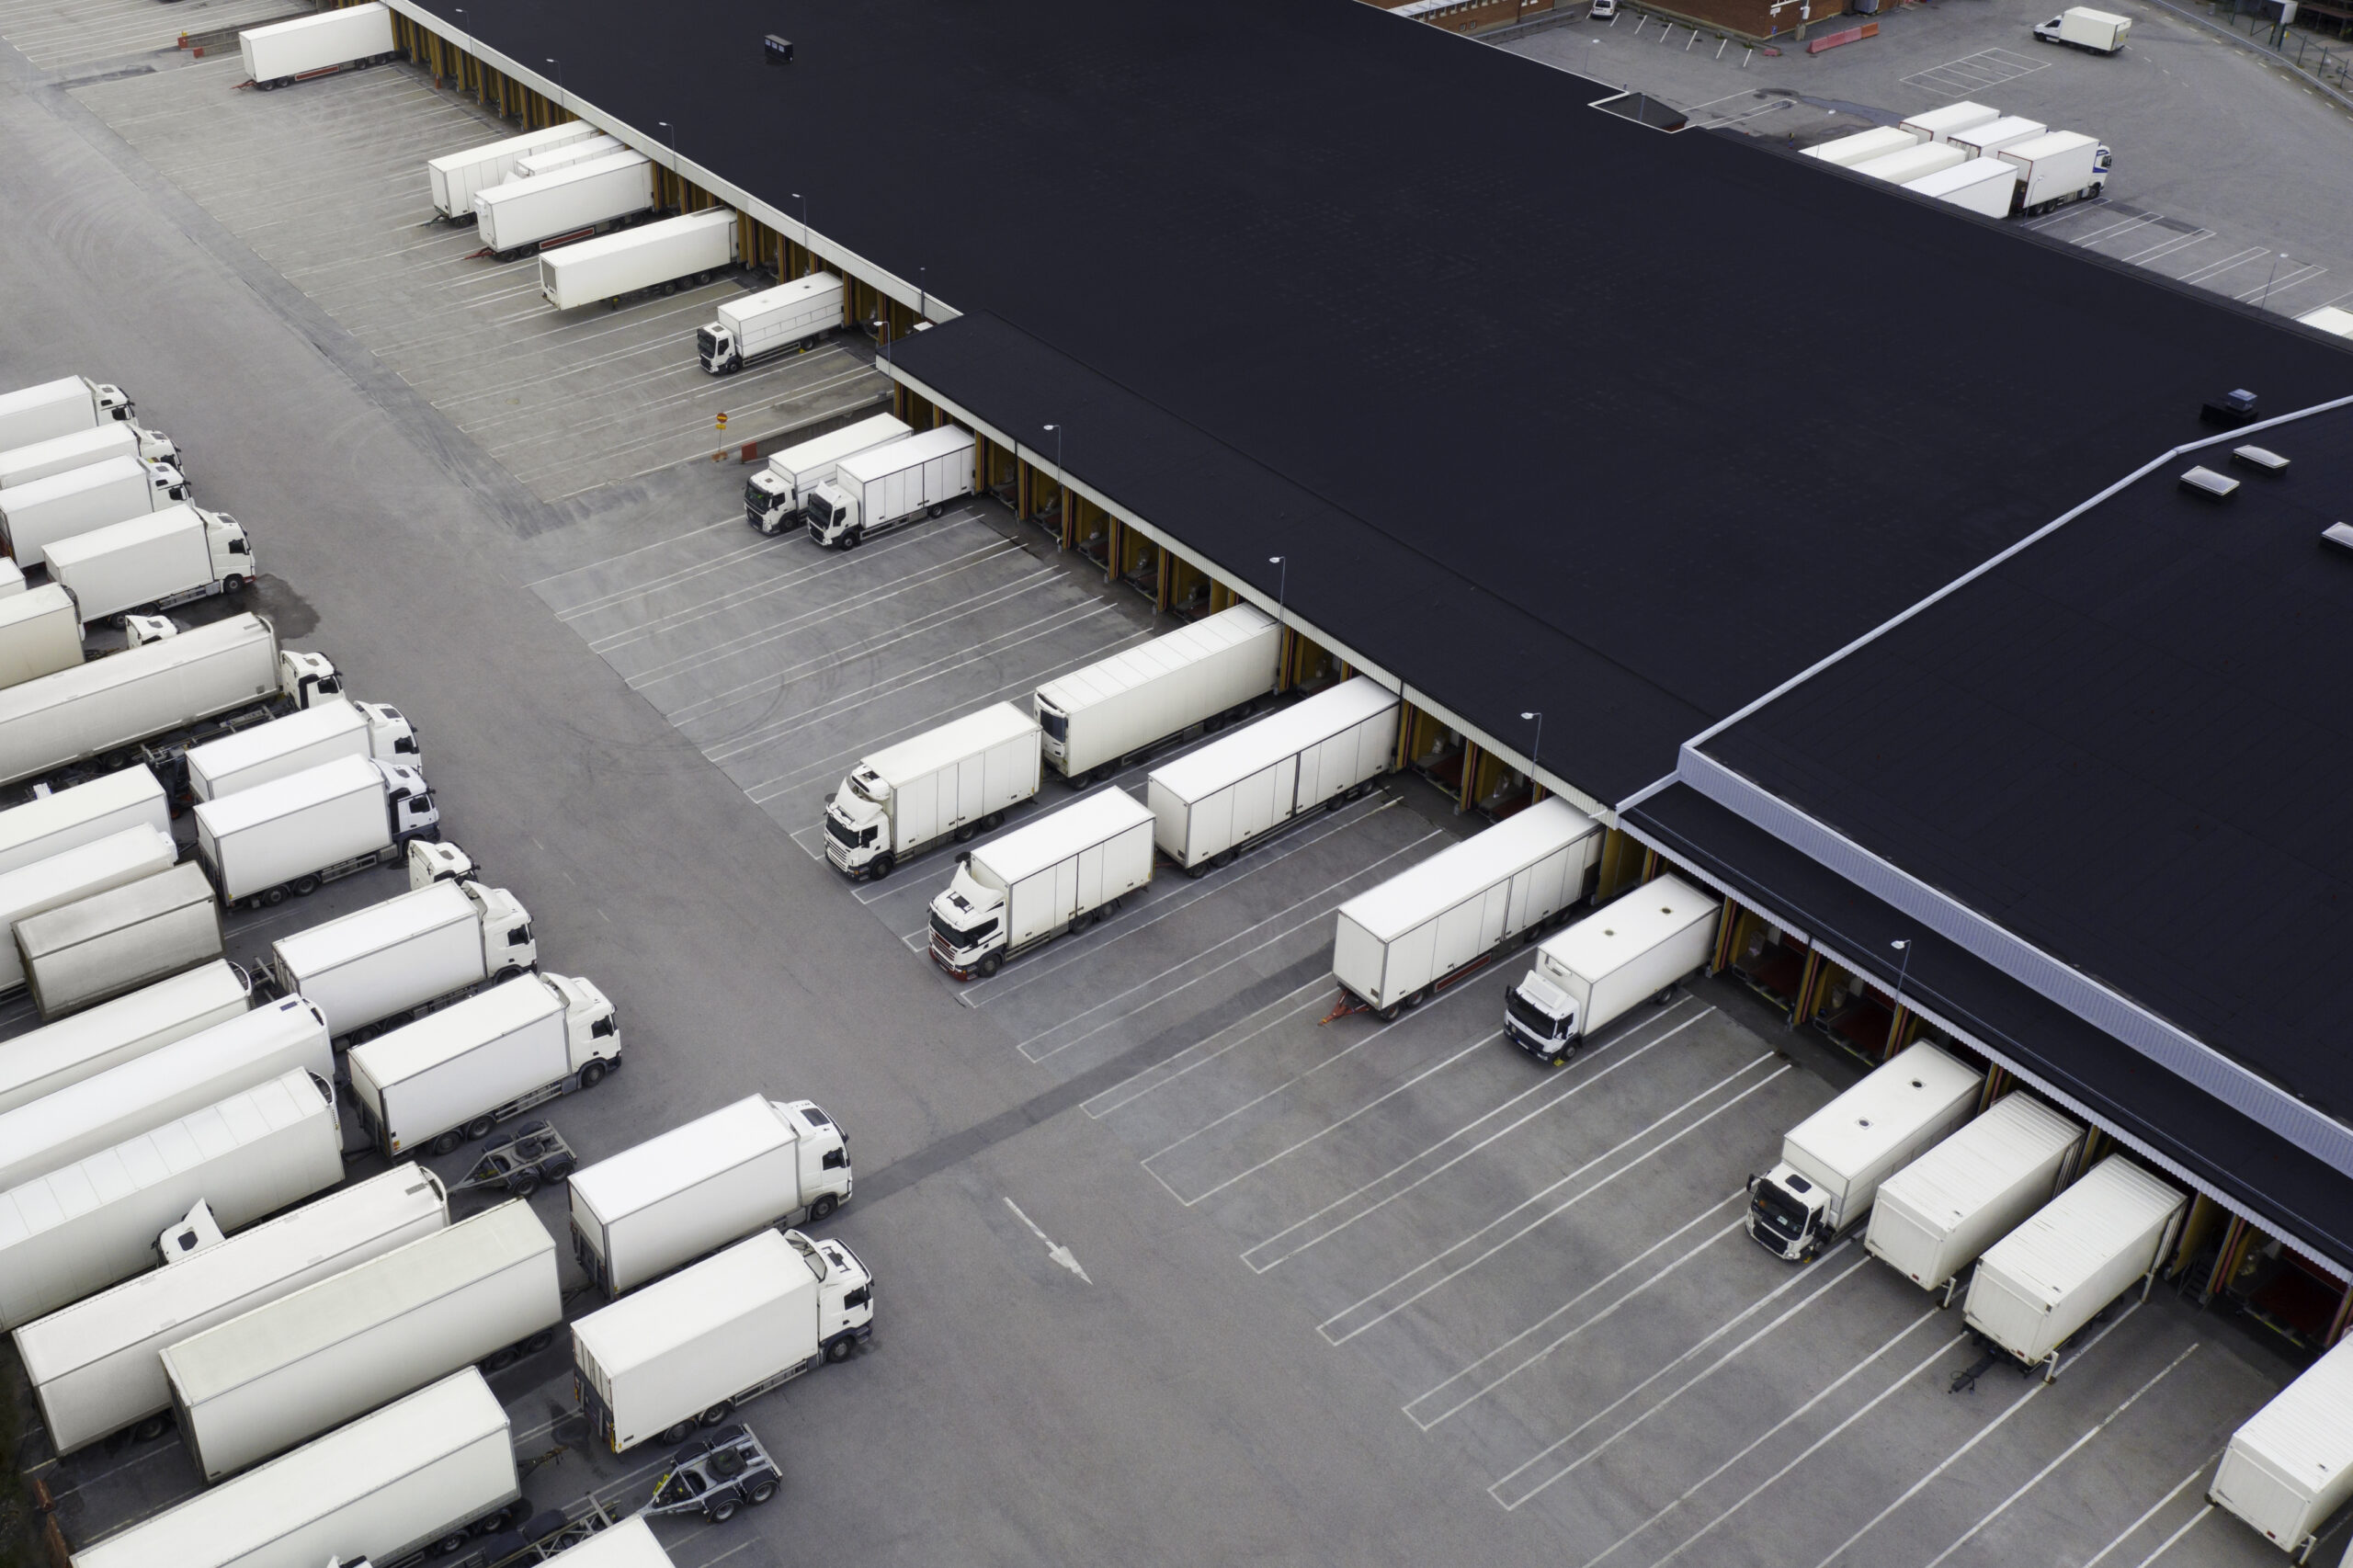 Large distribution center with many trucks viewed from above